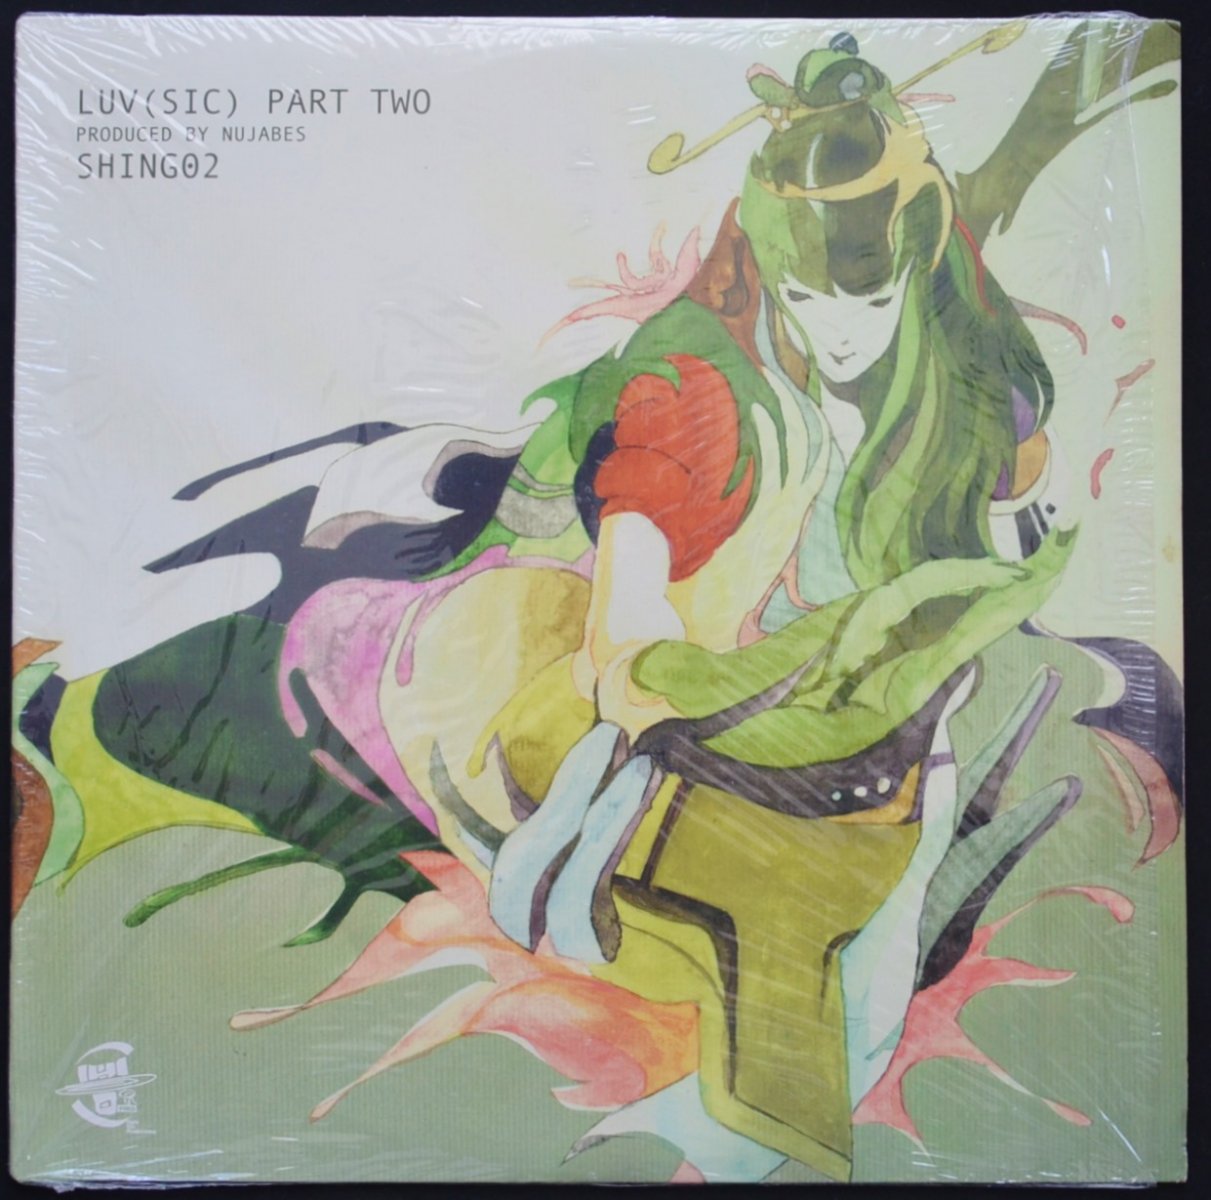 NUJABES FEATURING SHING02 / LUV(SIC) PART TWO (12